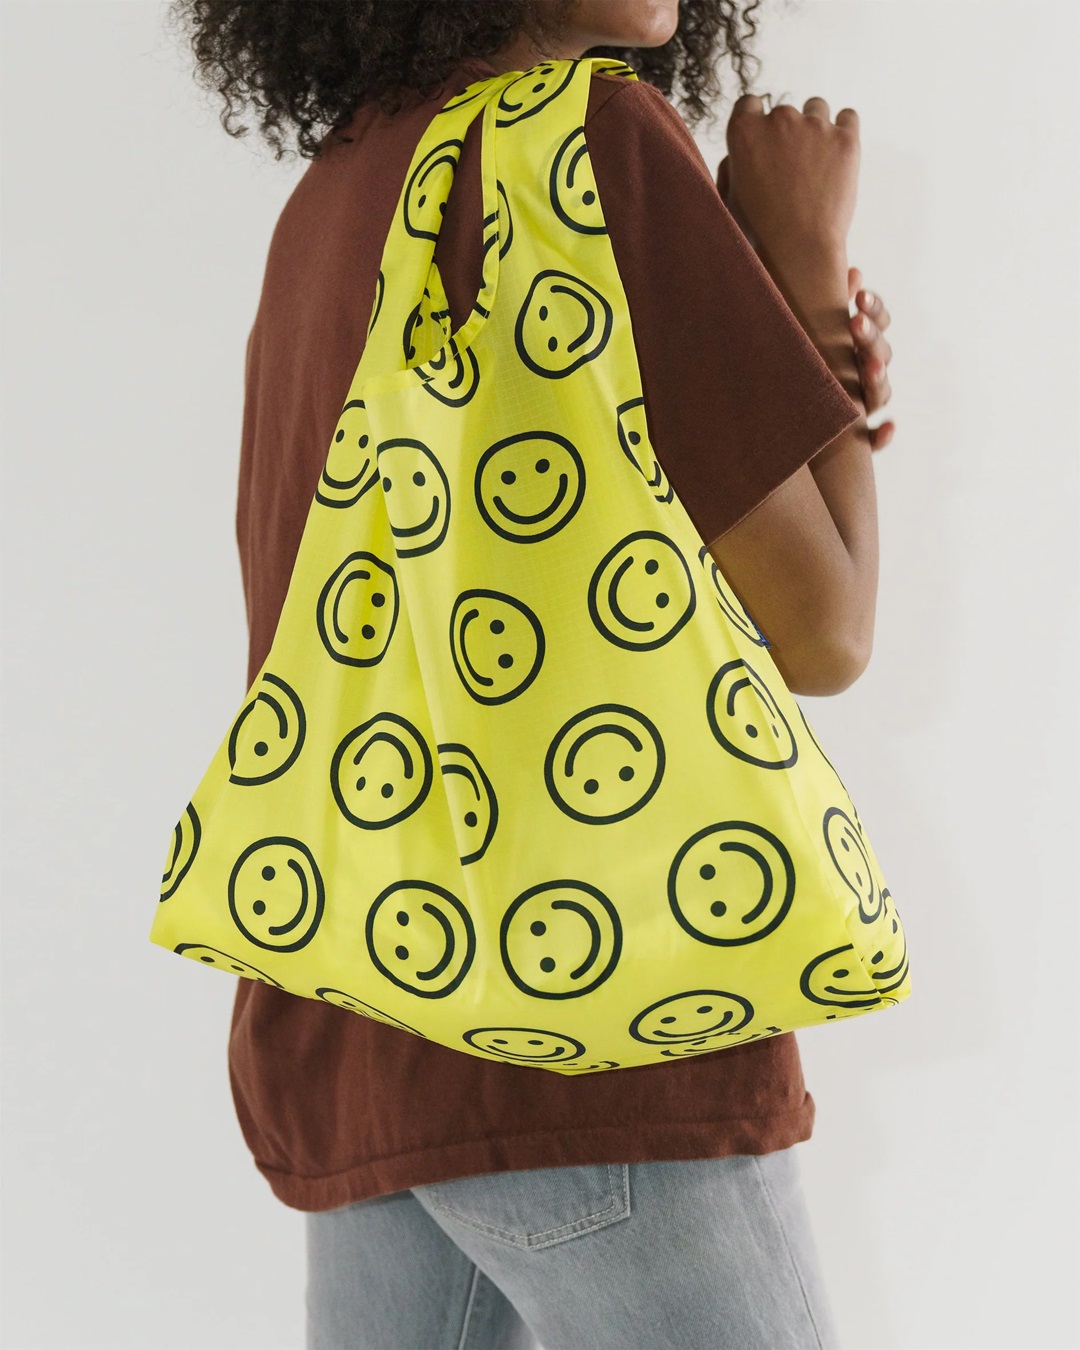 Yellow smiley face bag on shoulder